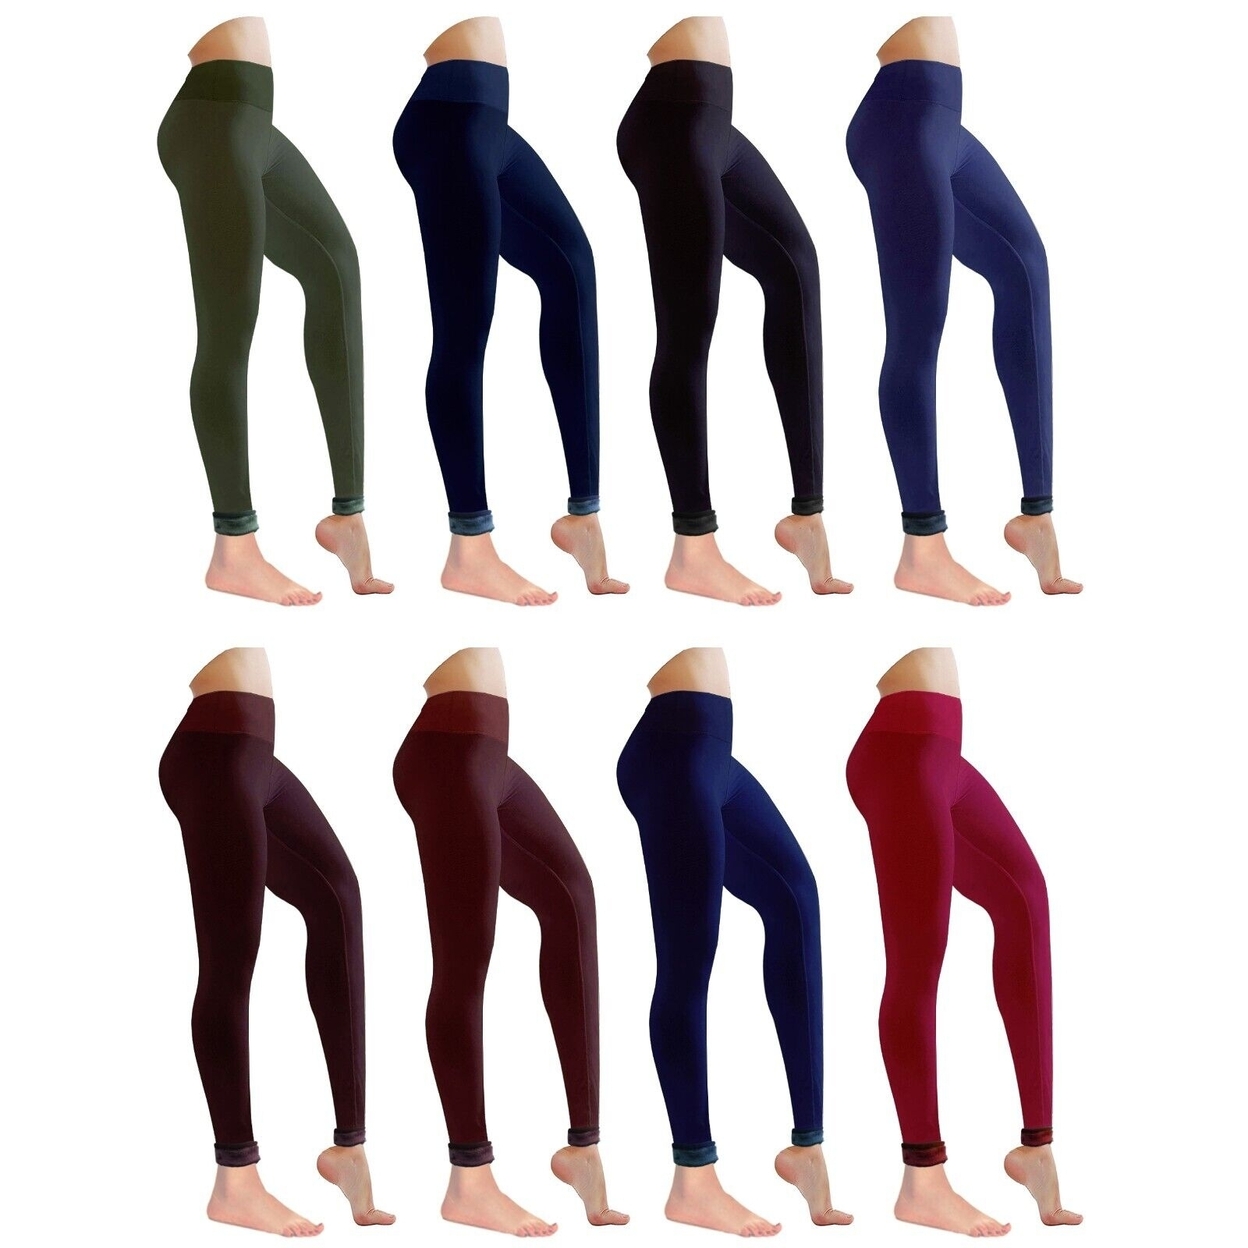 Multi-Pack: Women's Winter Warm Ultra Soft Cozy Fur Lined Leggings - Assorted, 1-pack, Small